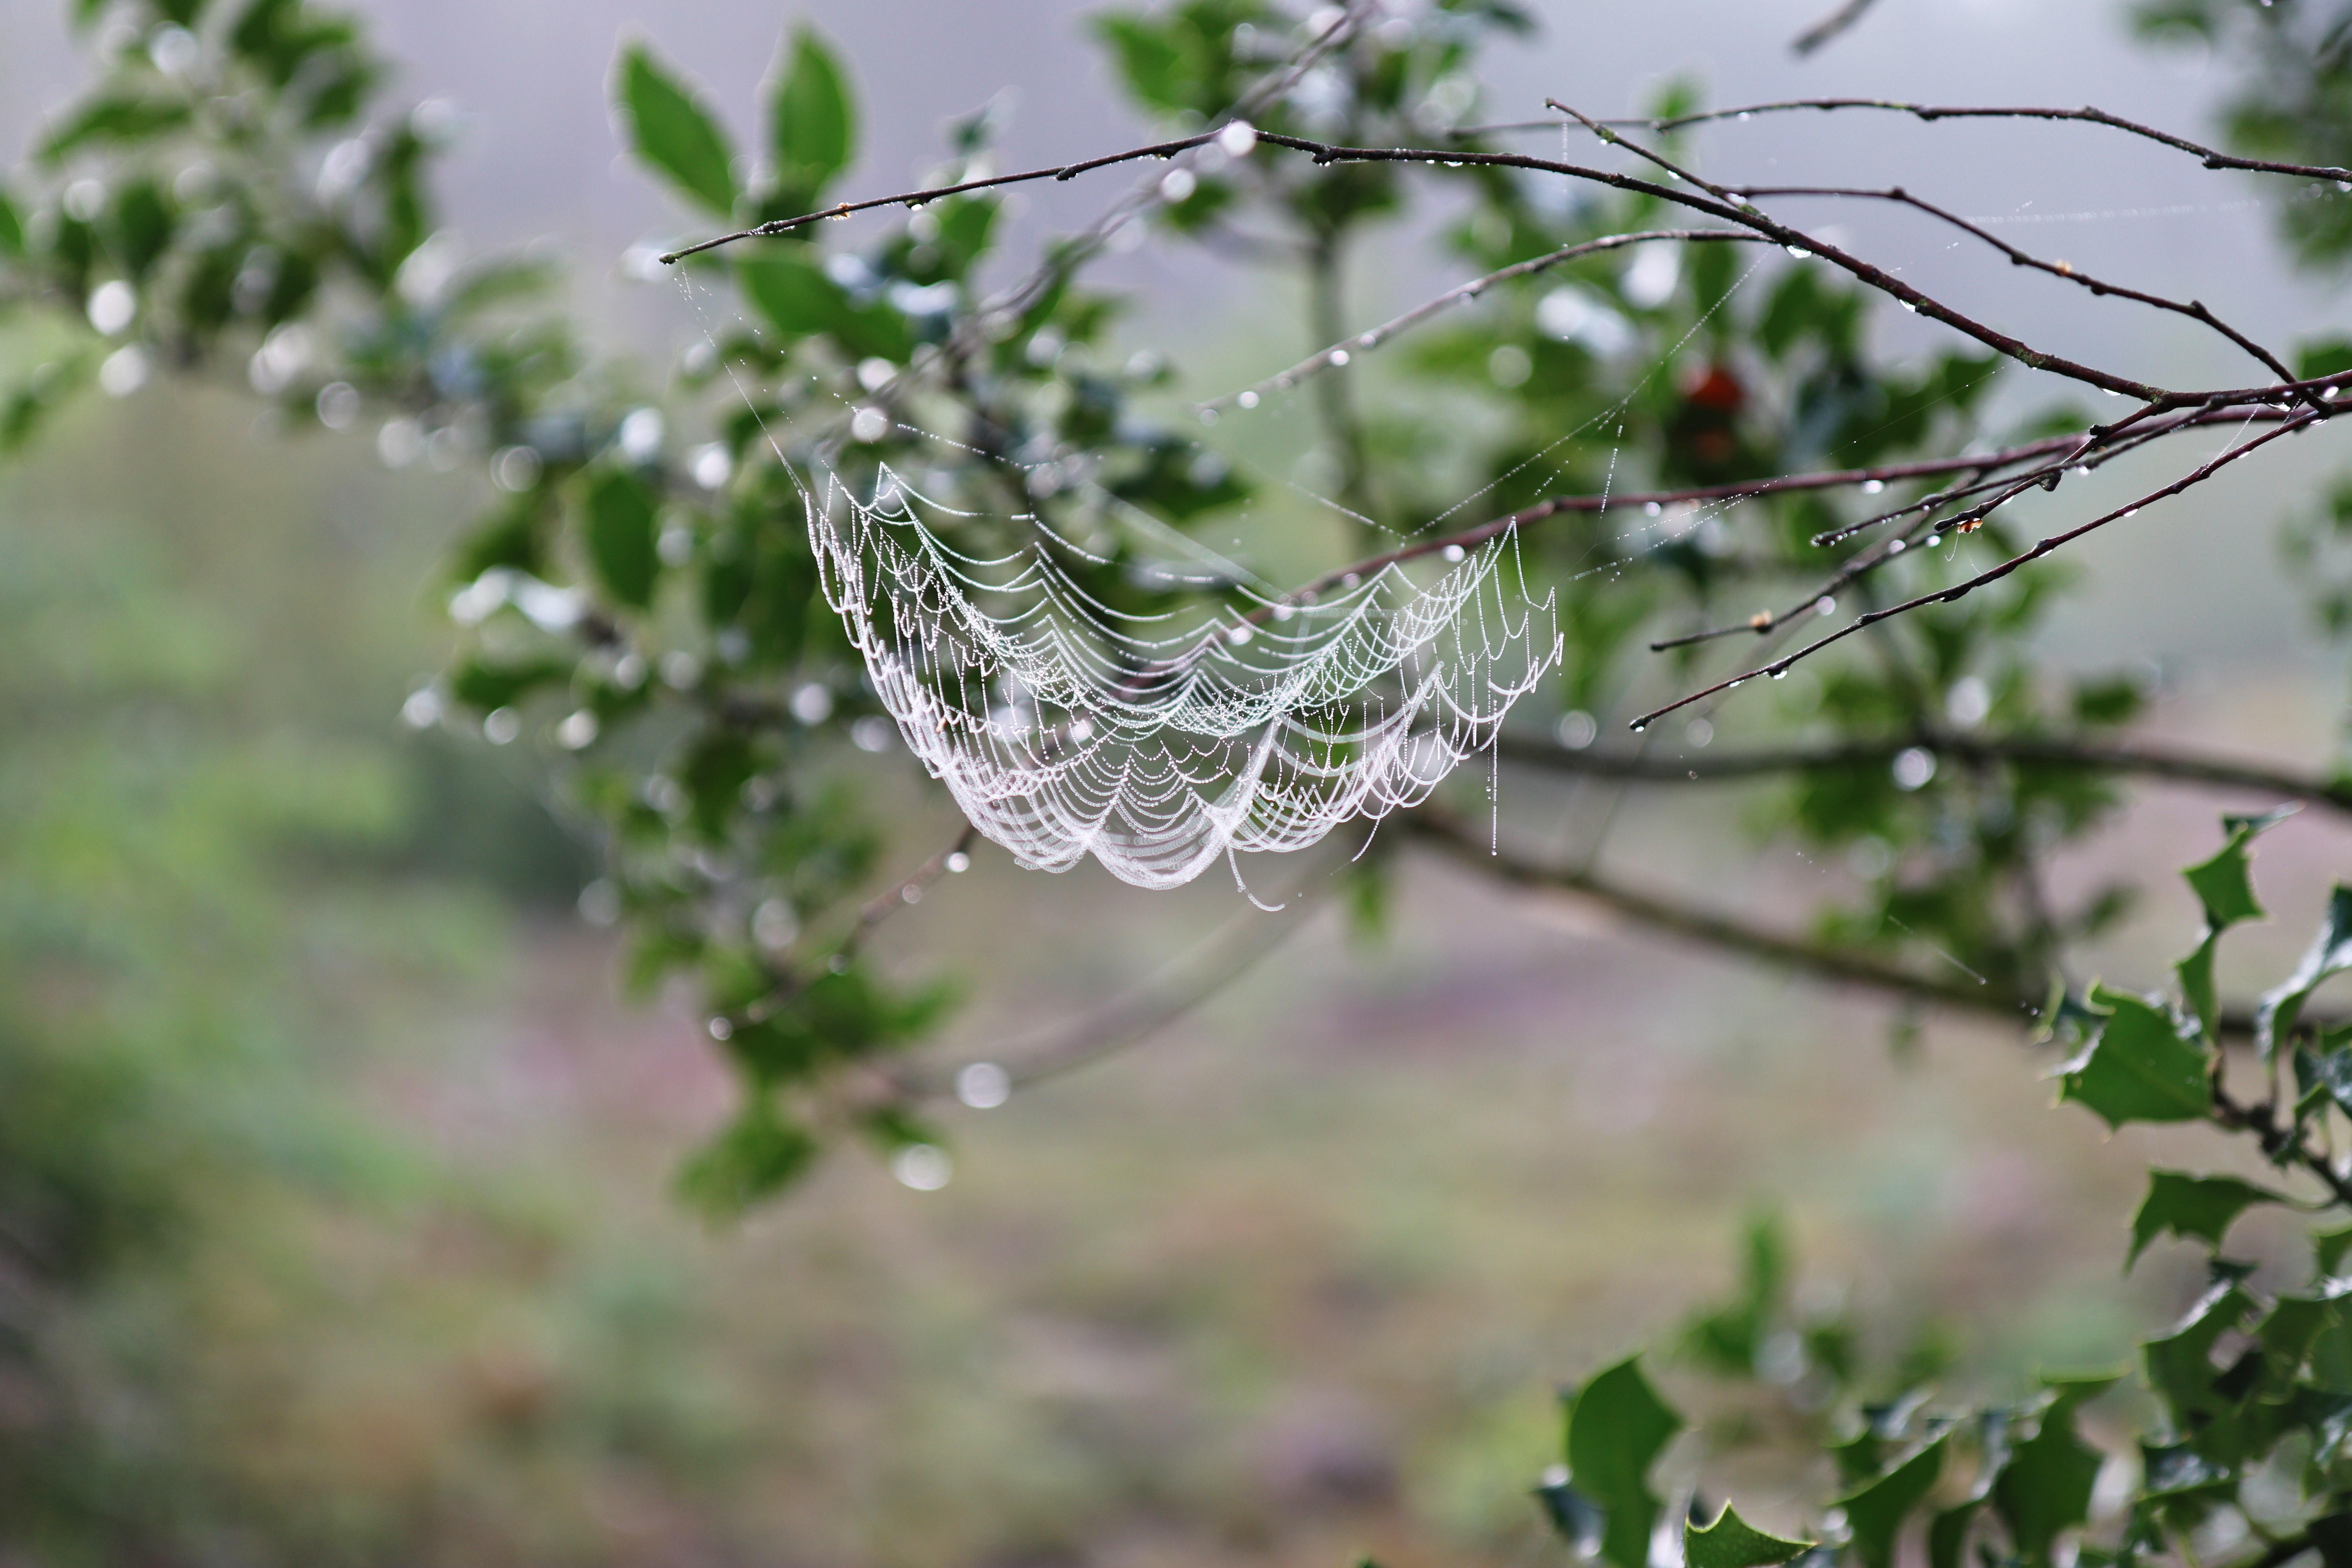 General 6960x4640 nature spiderwebs blurred blurry background branch leaves closeup macro